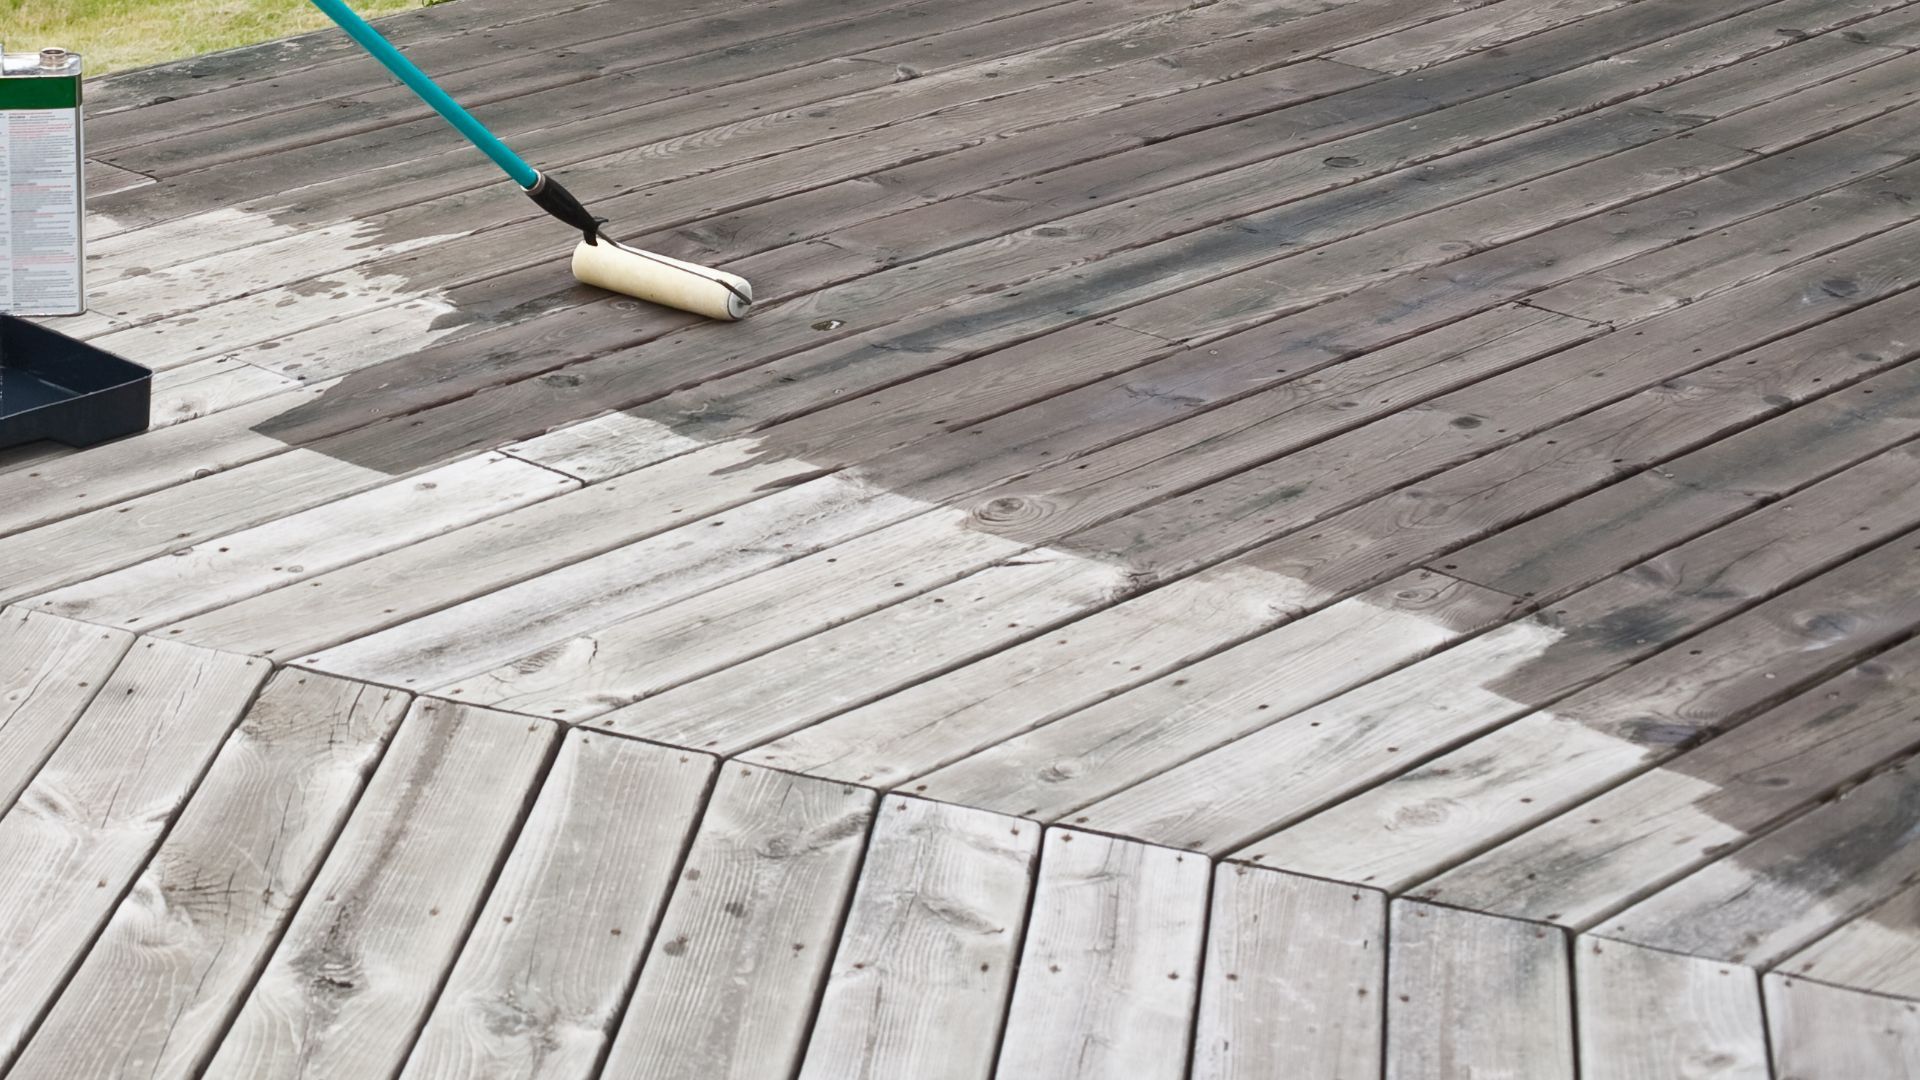 Applying sealant to a wooden deck for waterproofing in Lexington, KY.